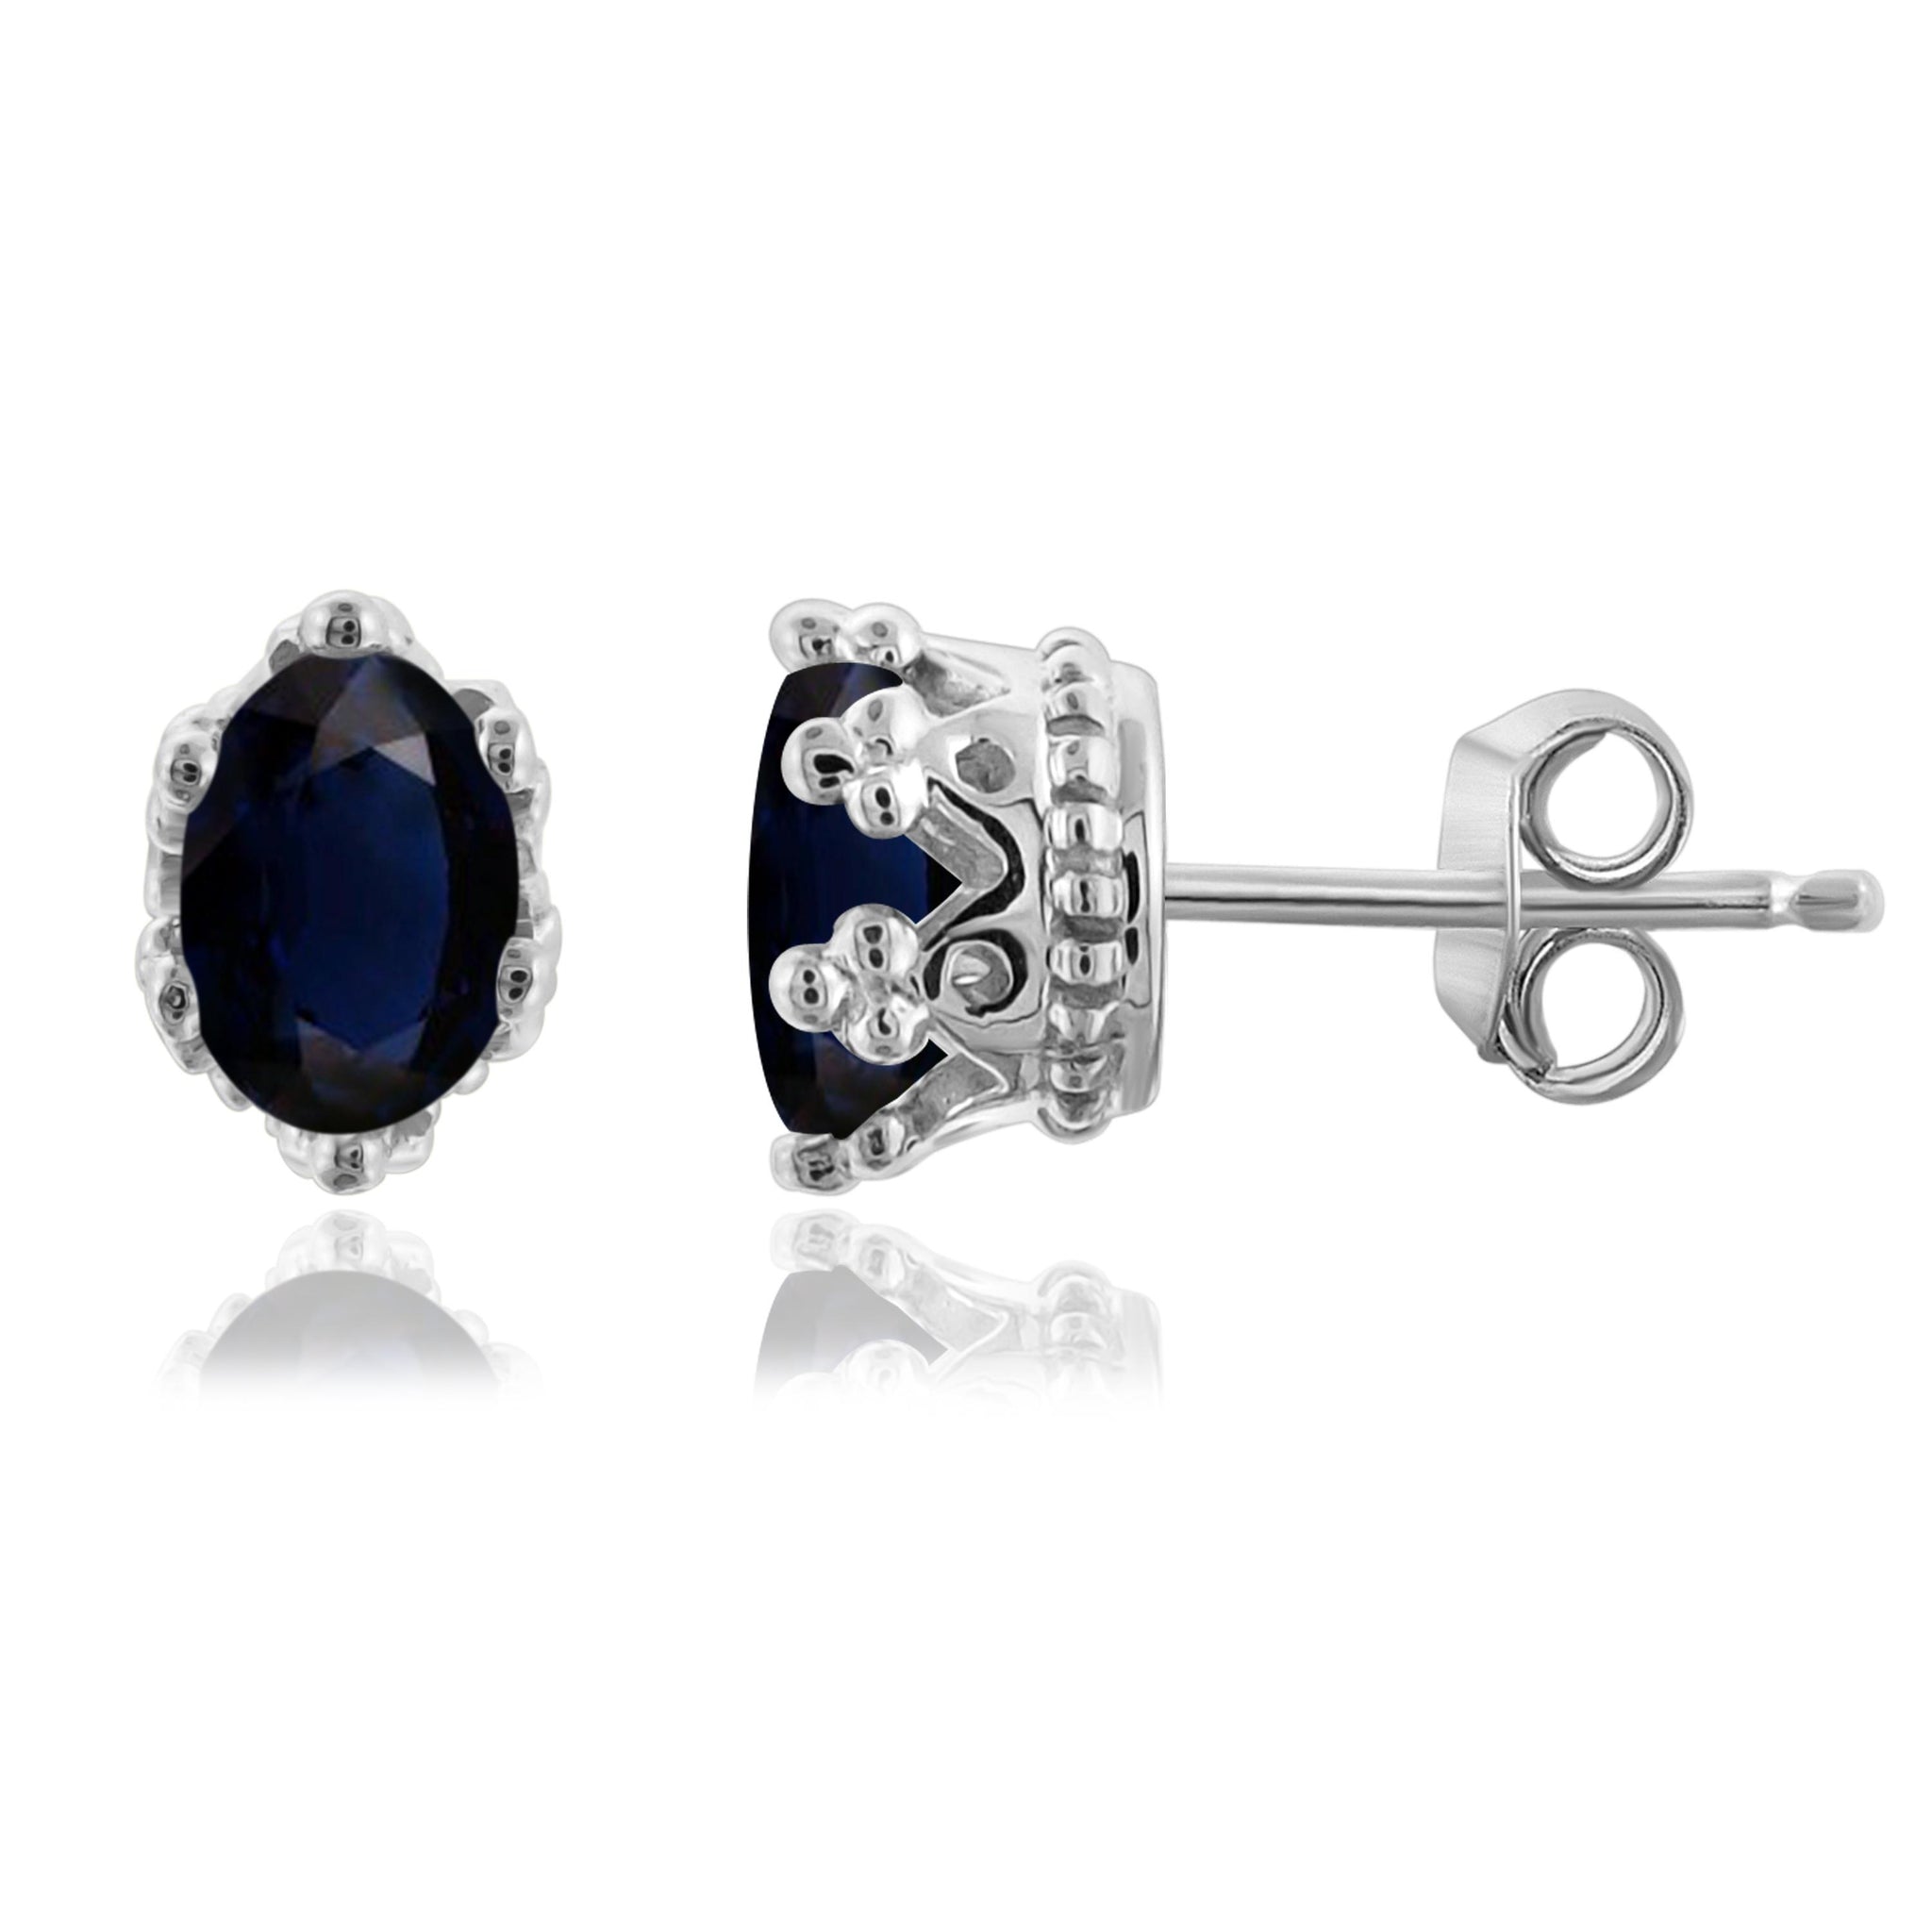 JewelonFire 1.30 Carat T.G.W. Sapphire Sterling Silver Earrings - Assorted Colors